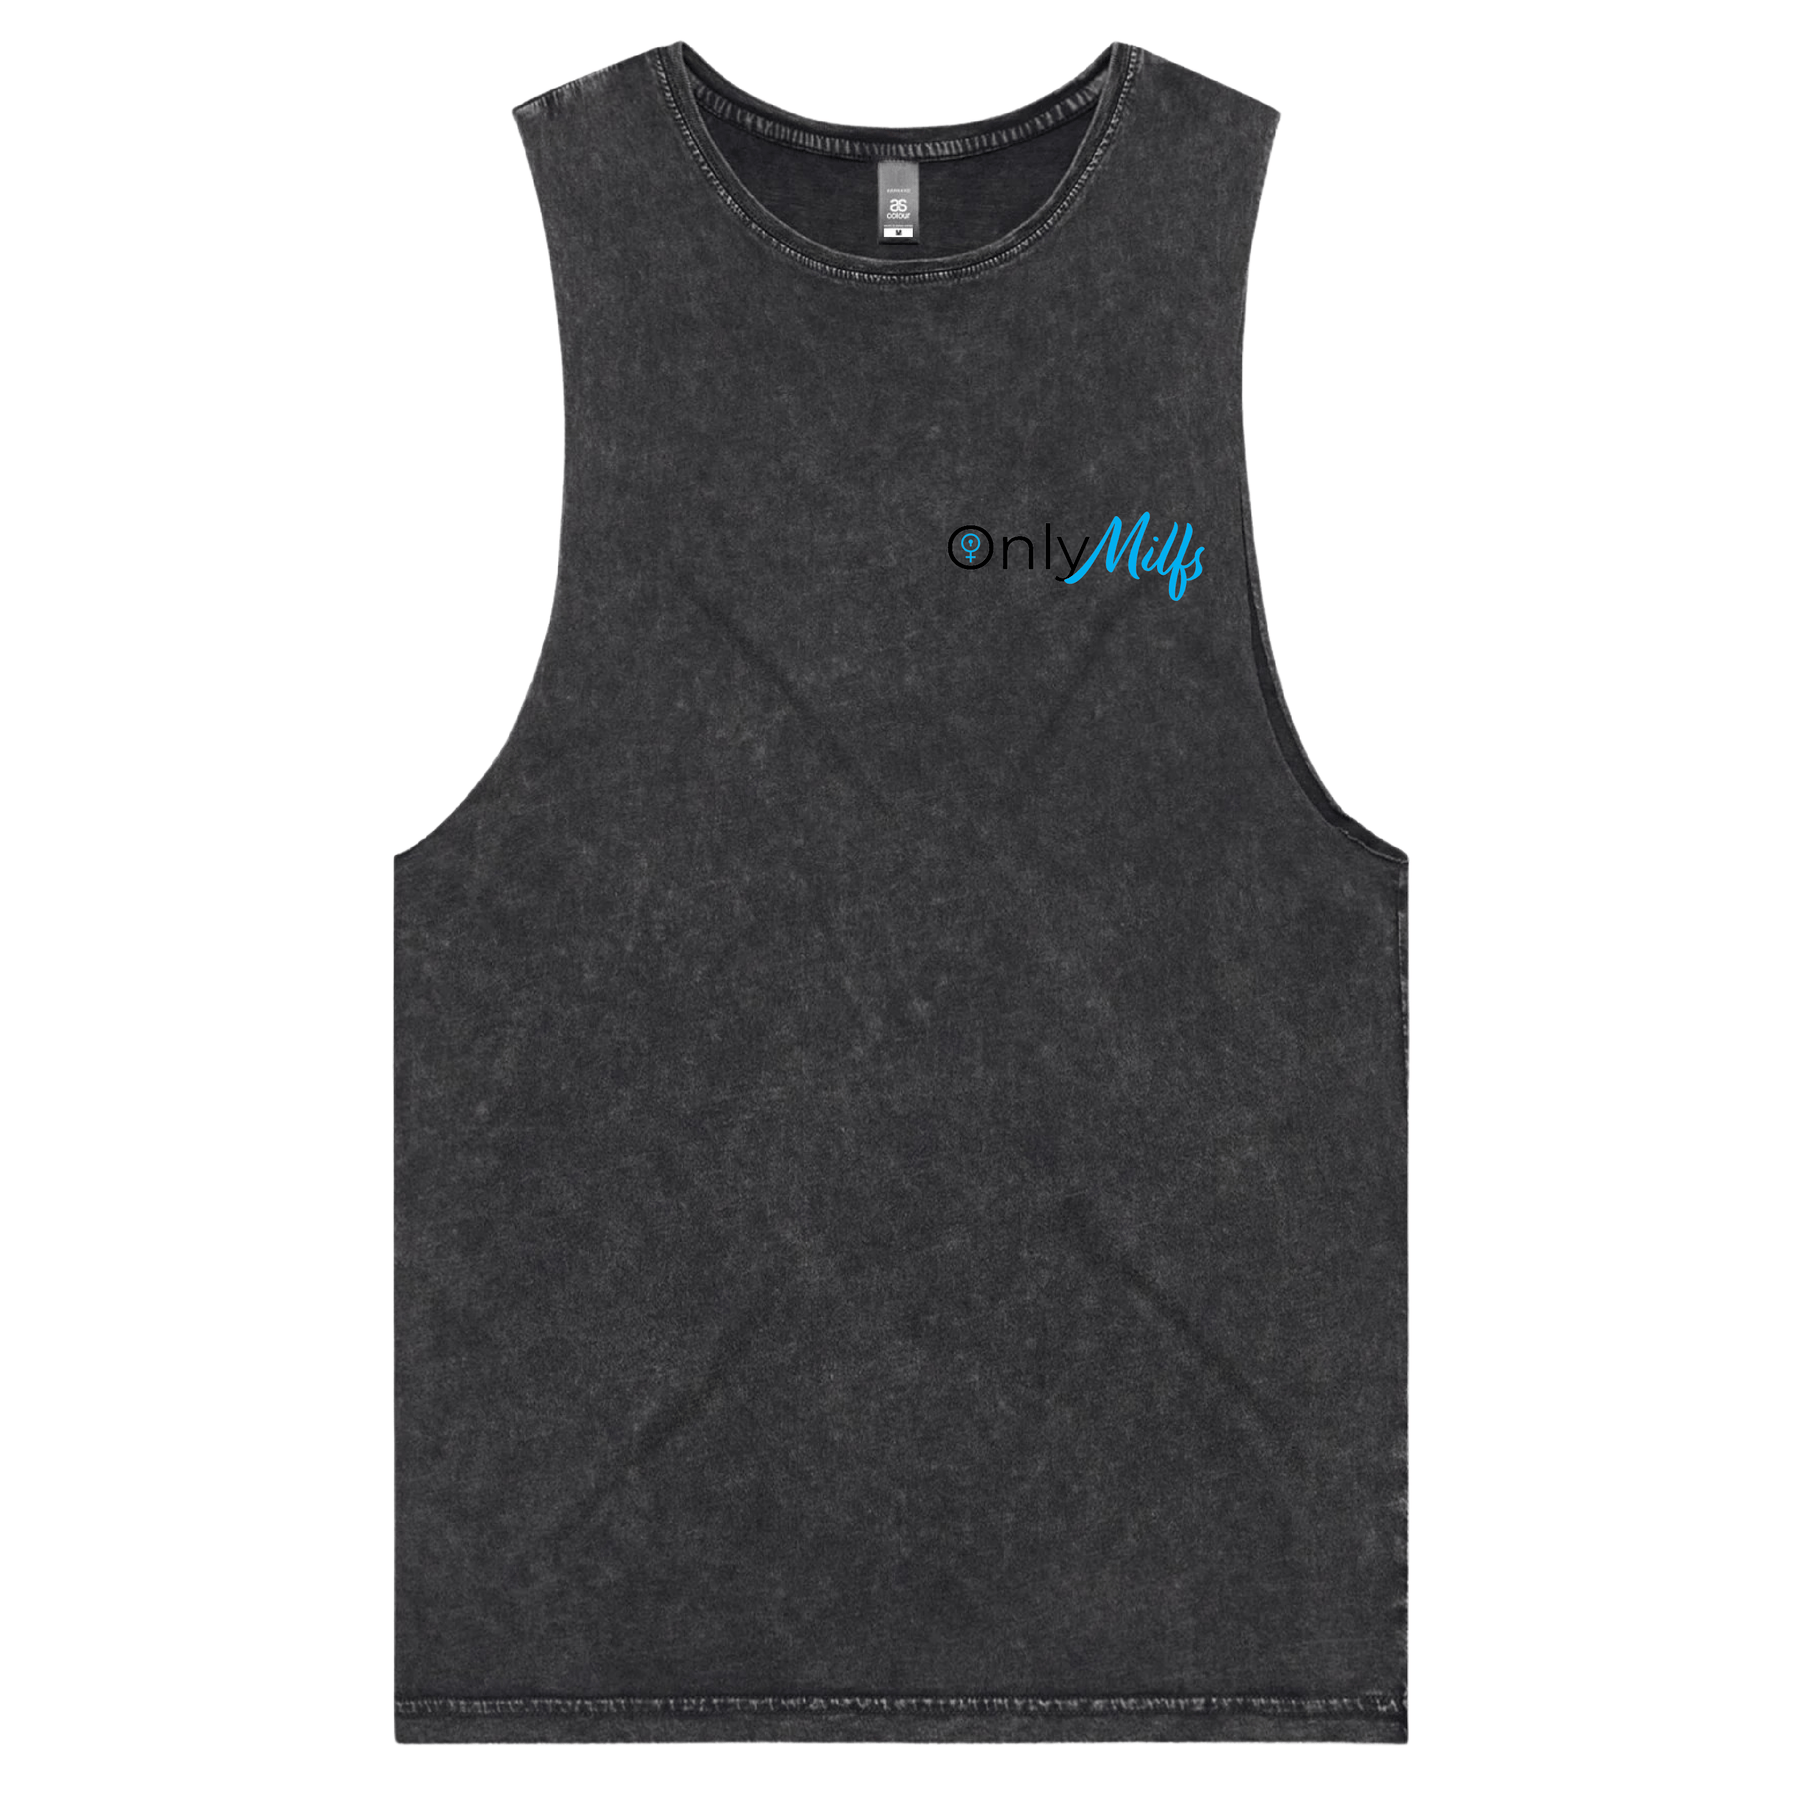 S / Black / Small Front Design Only Milfs 👩‍👧‍👦👀 – Tank